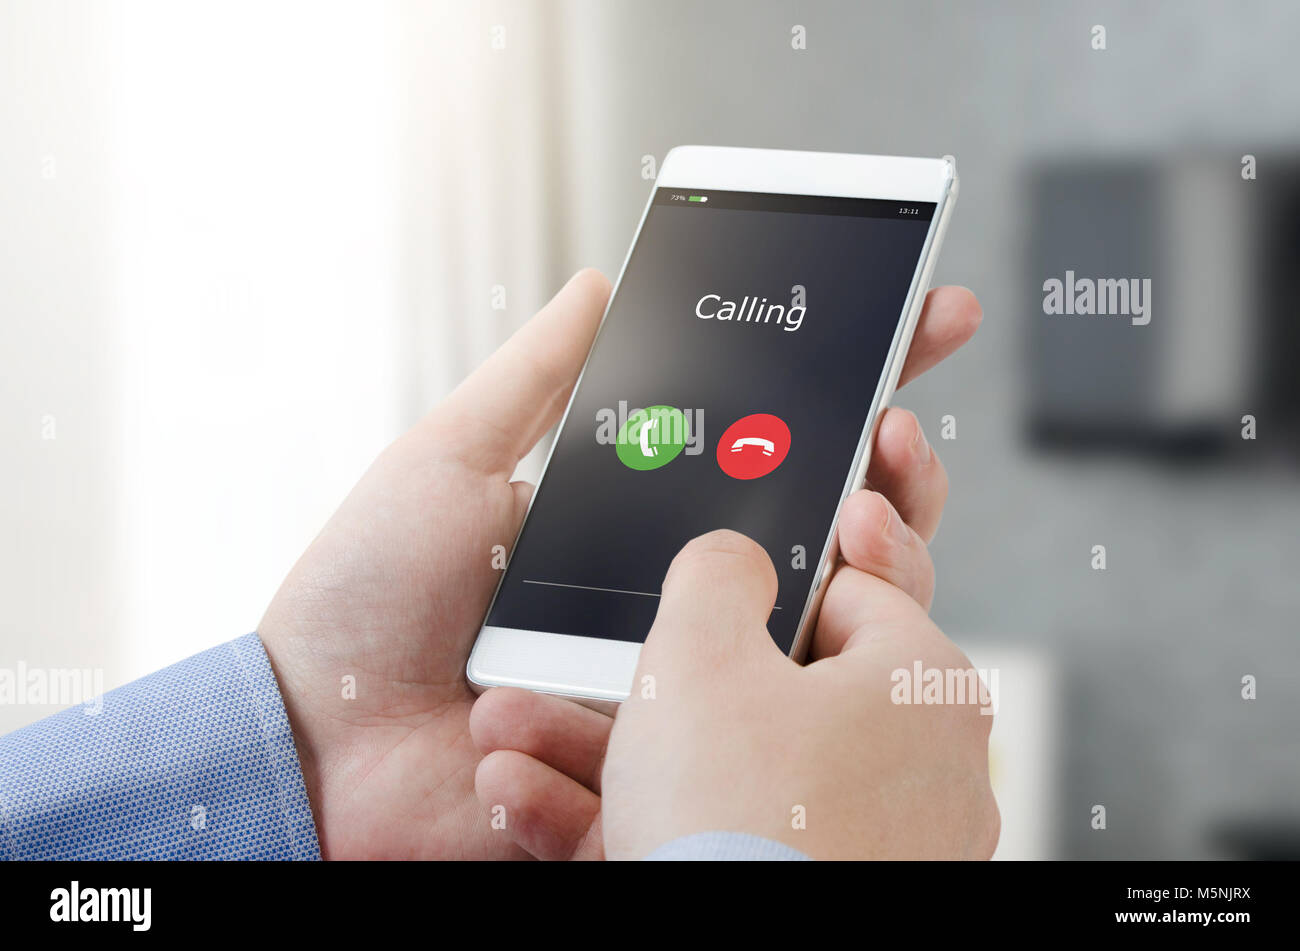 Man using a mobile phone. Making a call on a mobile device. mobile smart phone call calling interface man hand concept Stock Photo